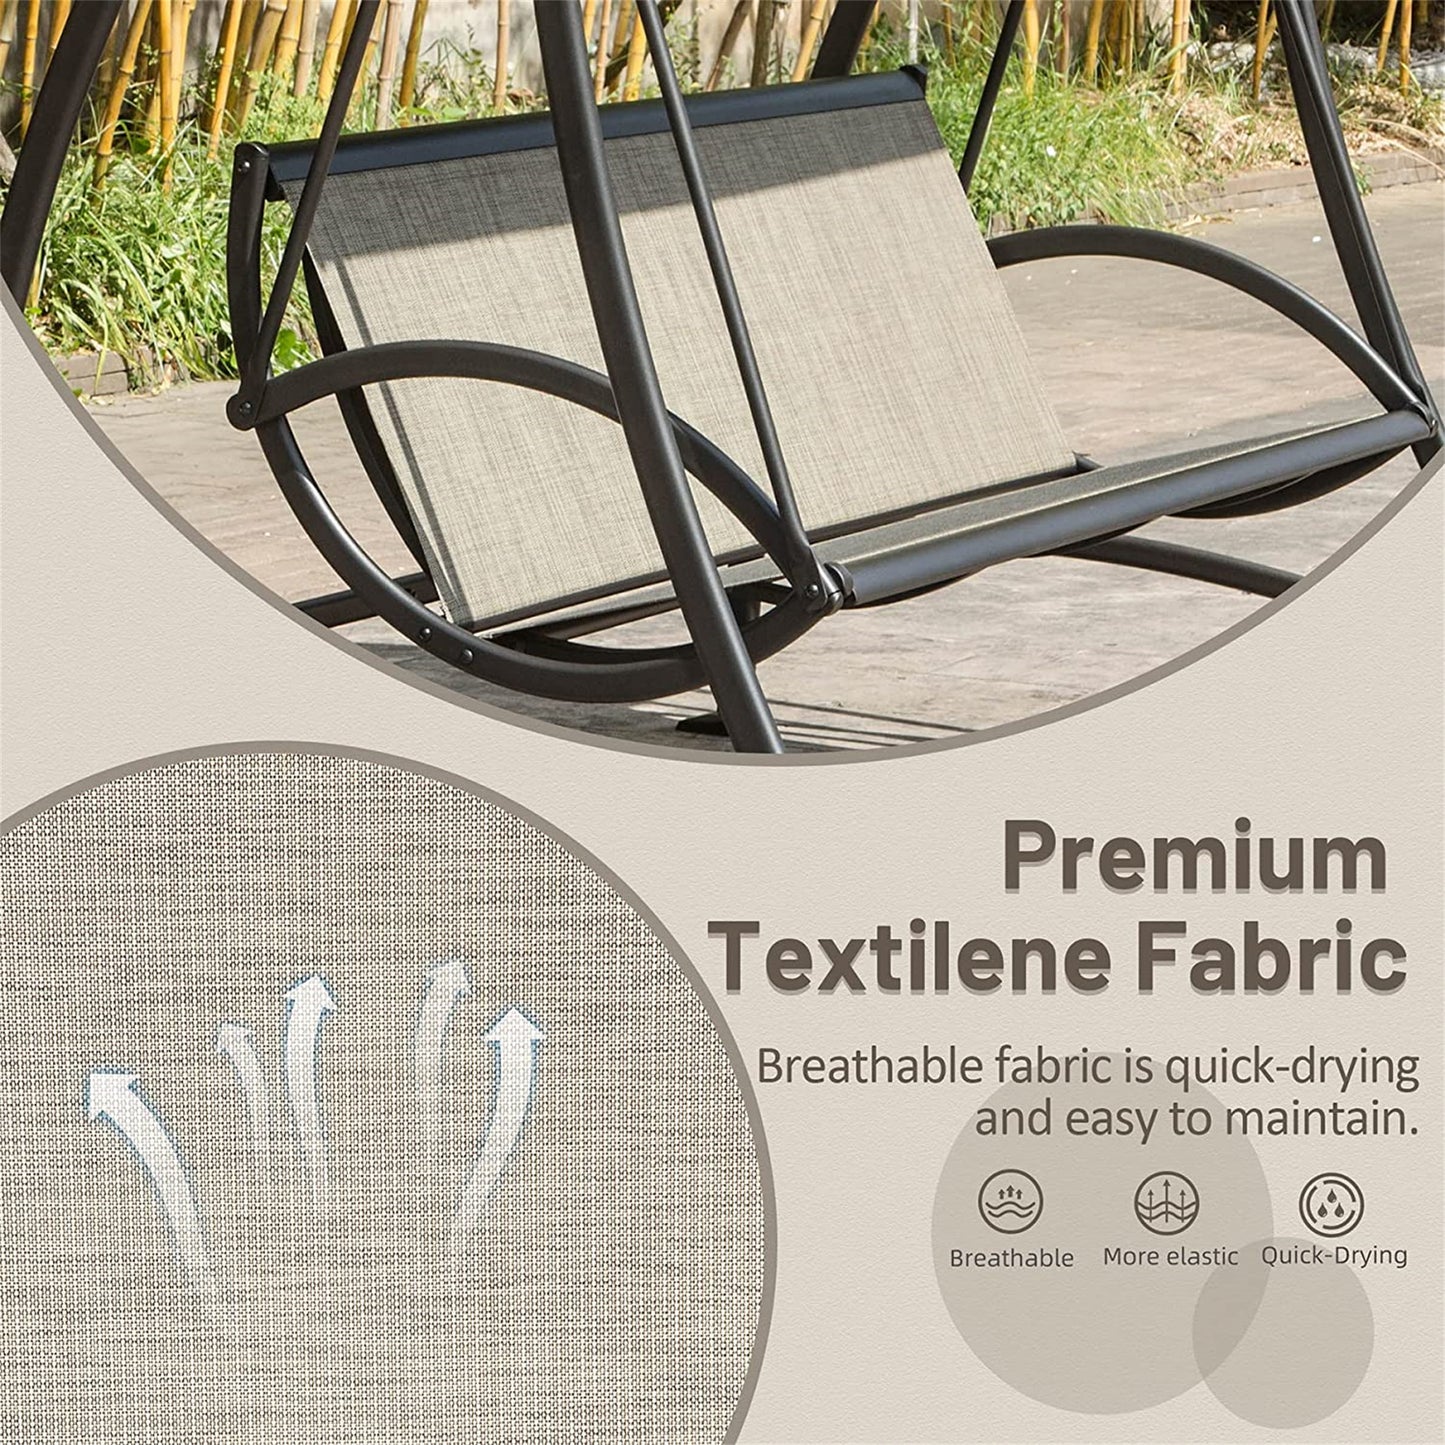 2-Seat Patio Chair, Outdoor Porch Swing, Adjustable Canopy